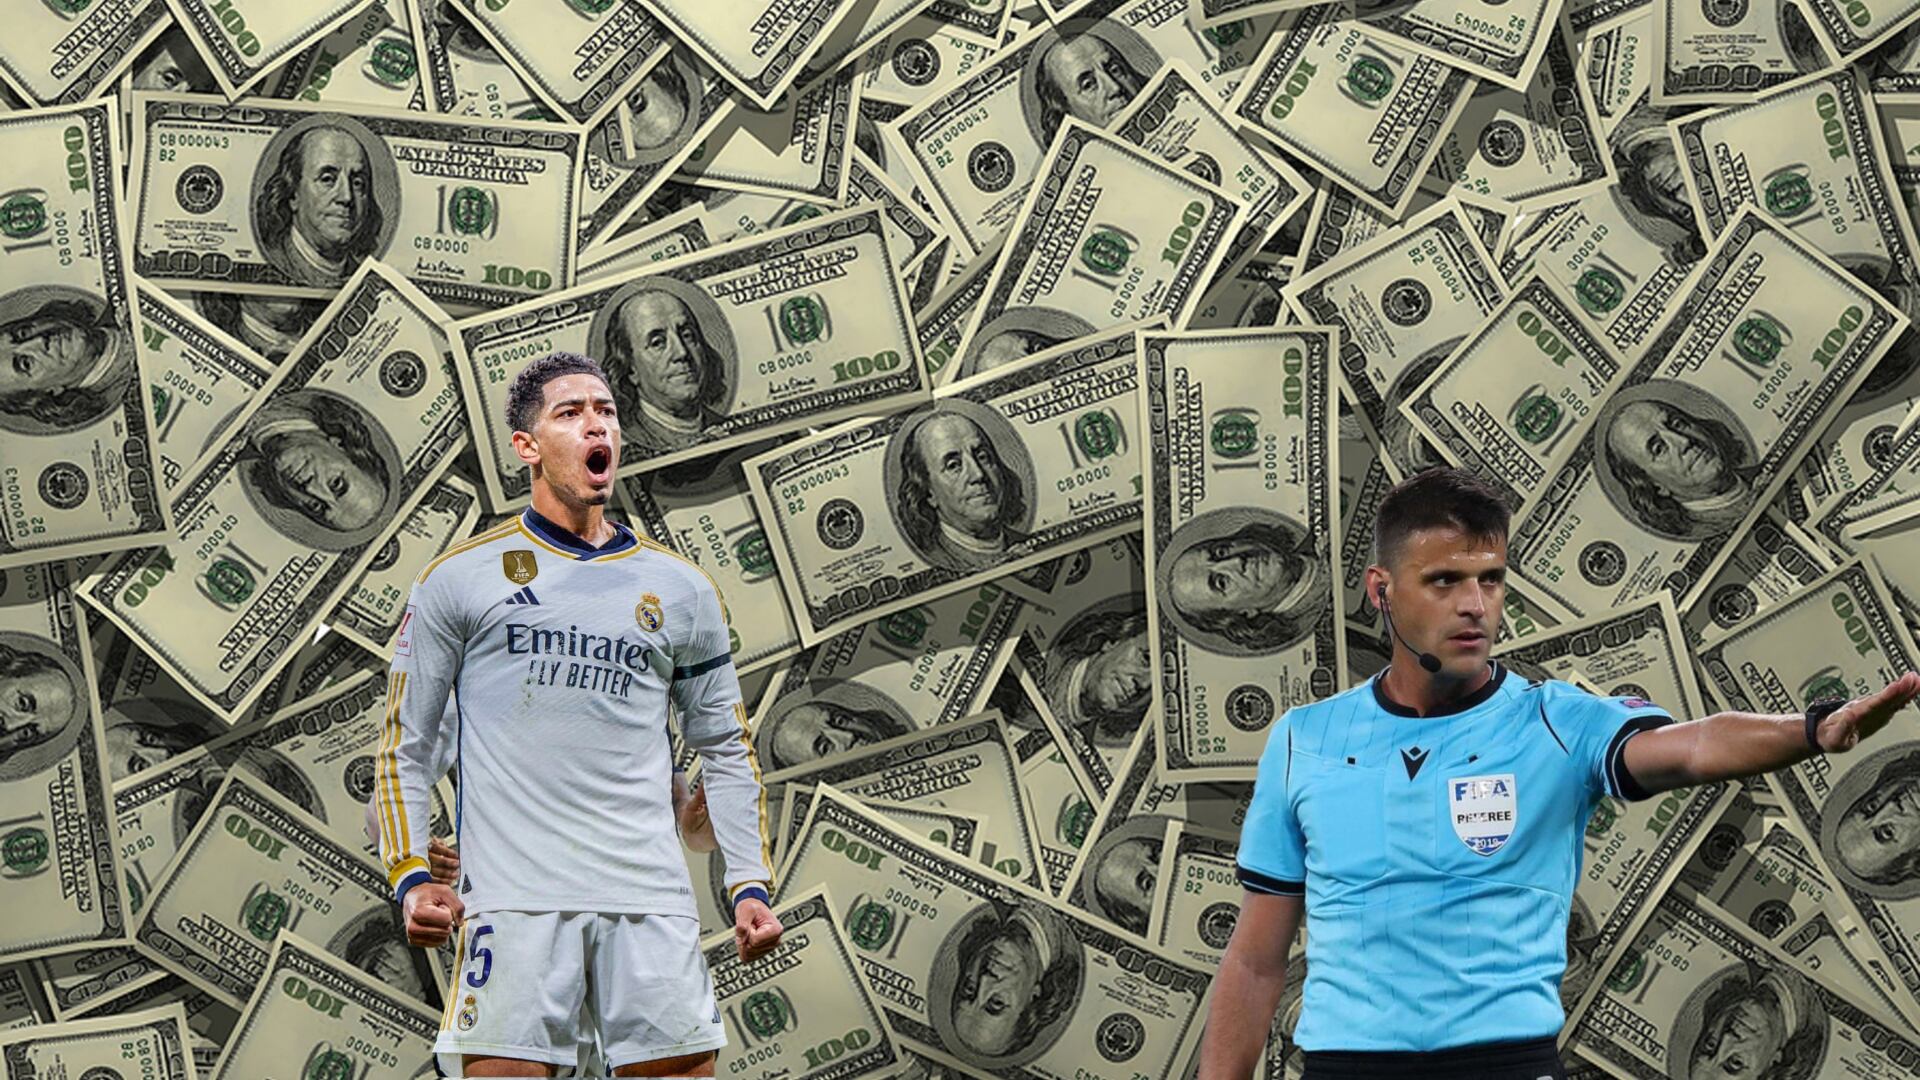 While Bellingham earns $130M a year, this is what a La Liga referee earns